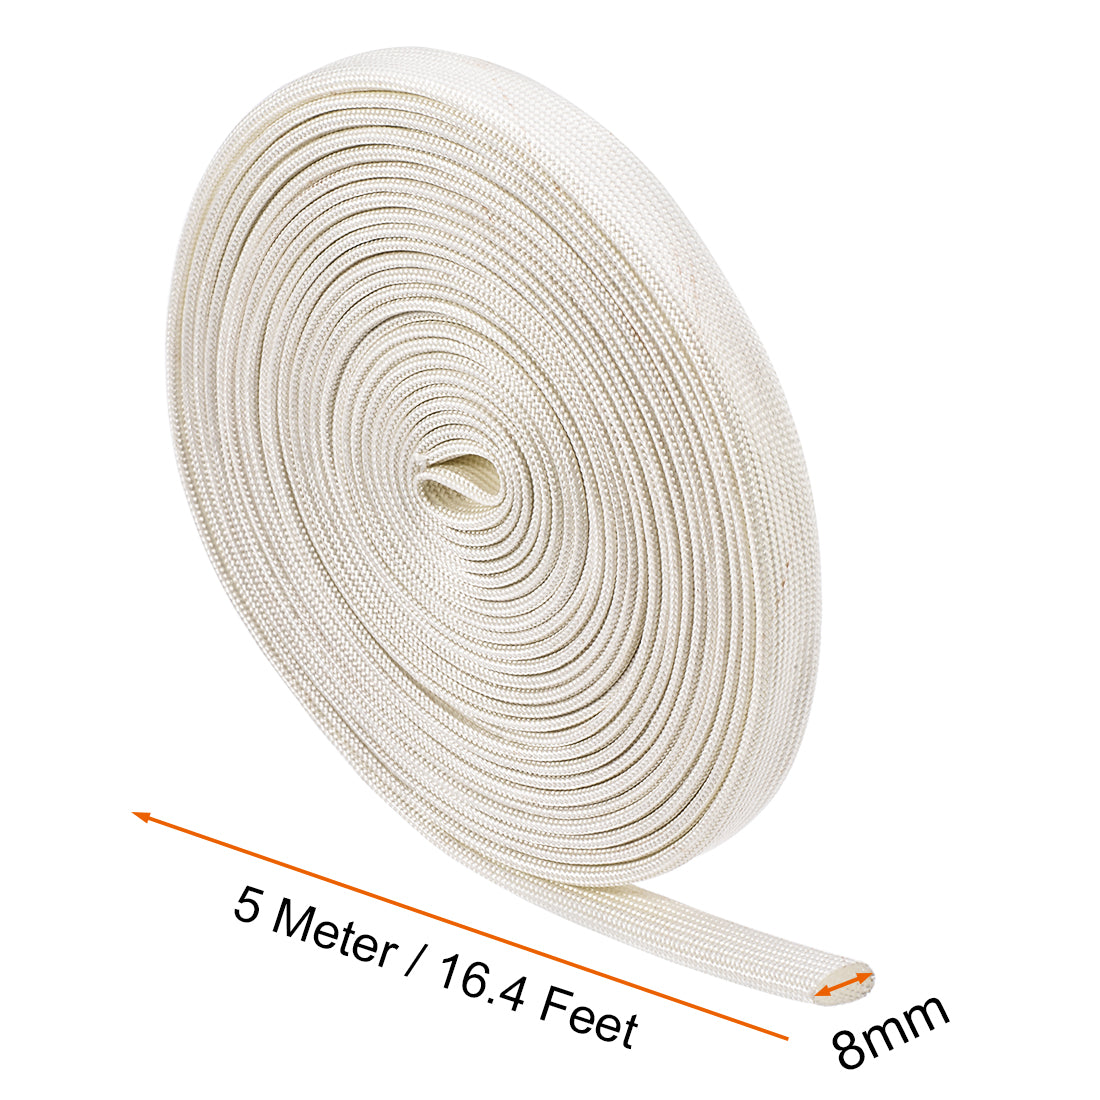 uxcell Uxcell Insulation Cable Protector, 16.4Ft-8mm High TEMP Fiberglass Sleeve Beige